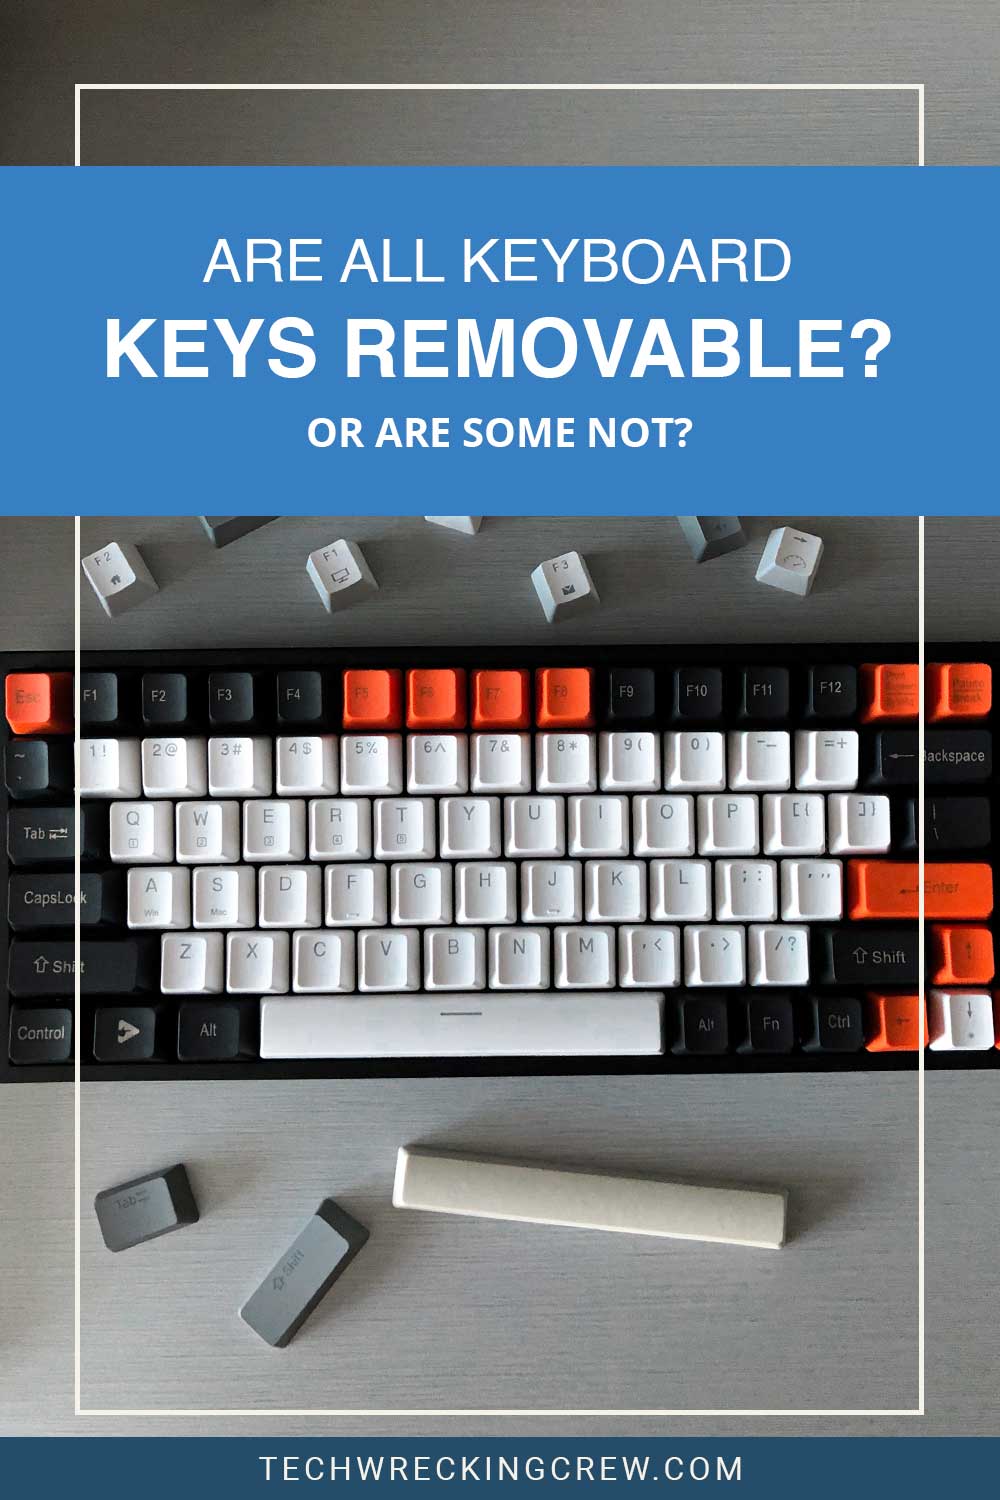 A keyboard and some loose keys on a grey surface - Are All Keyboard Keys Removable